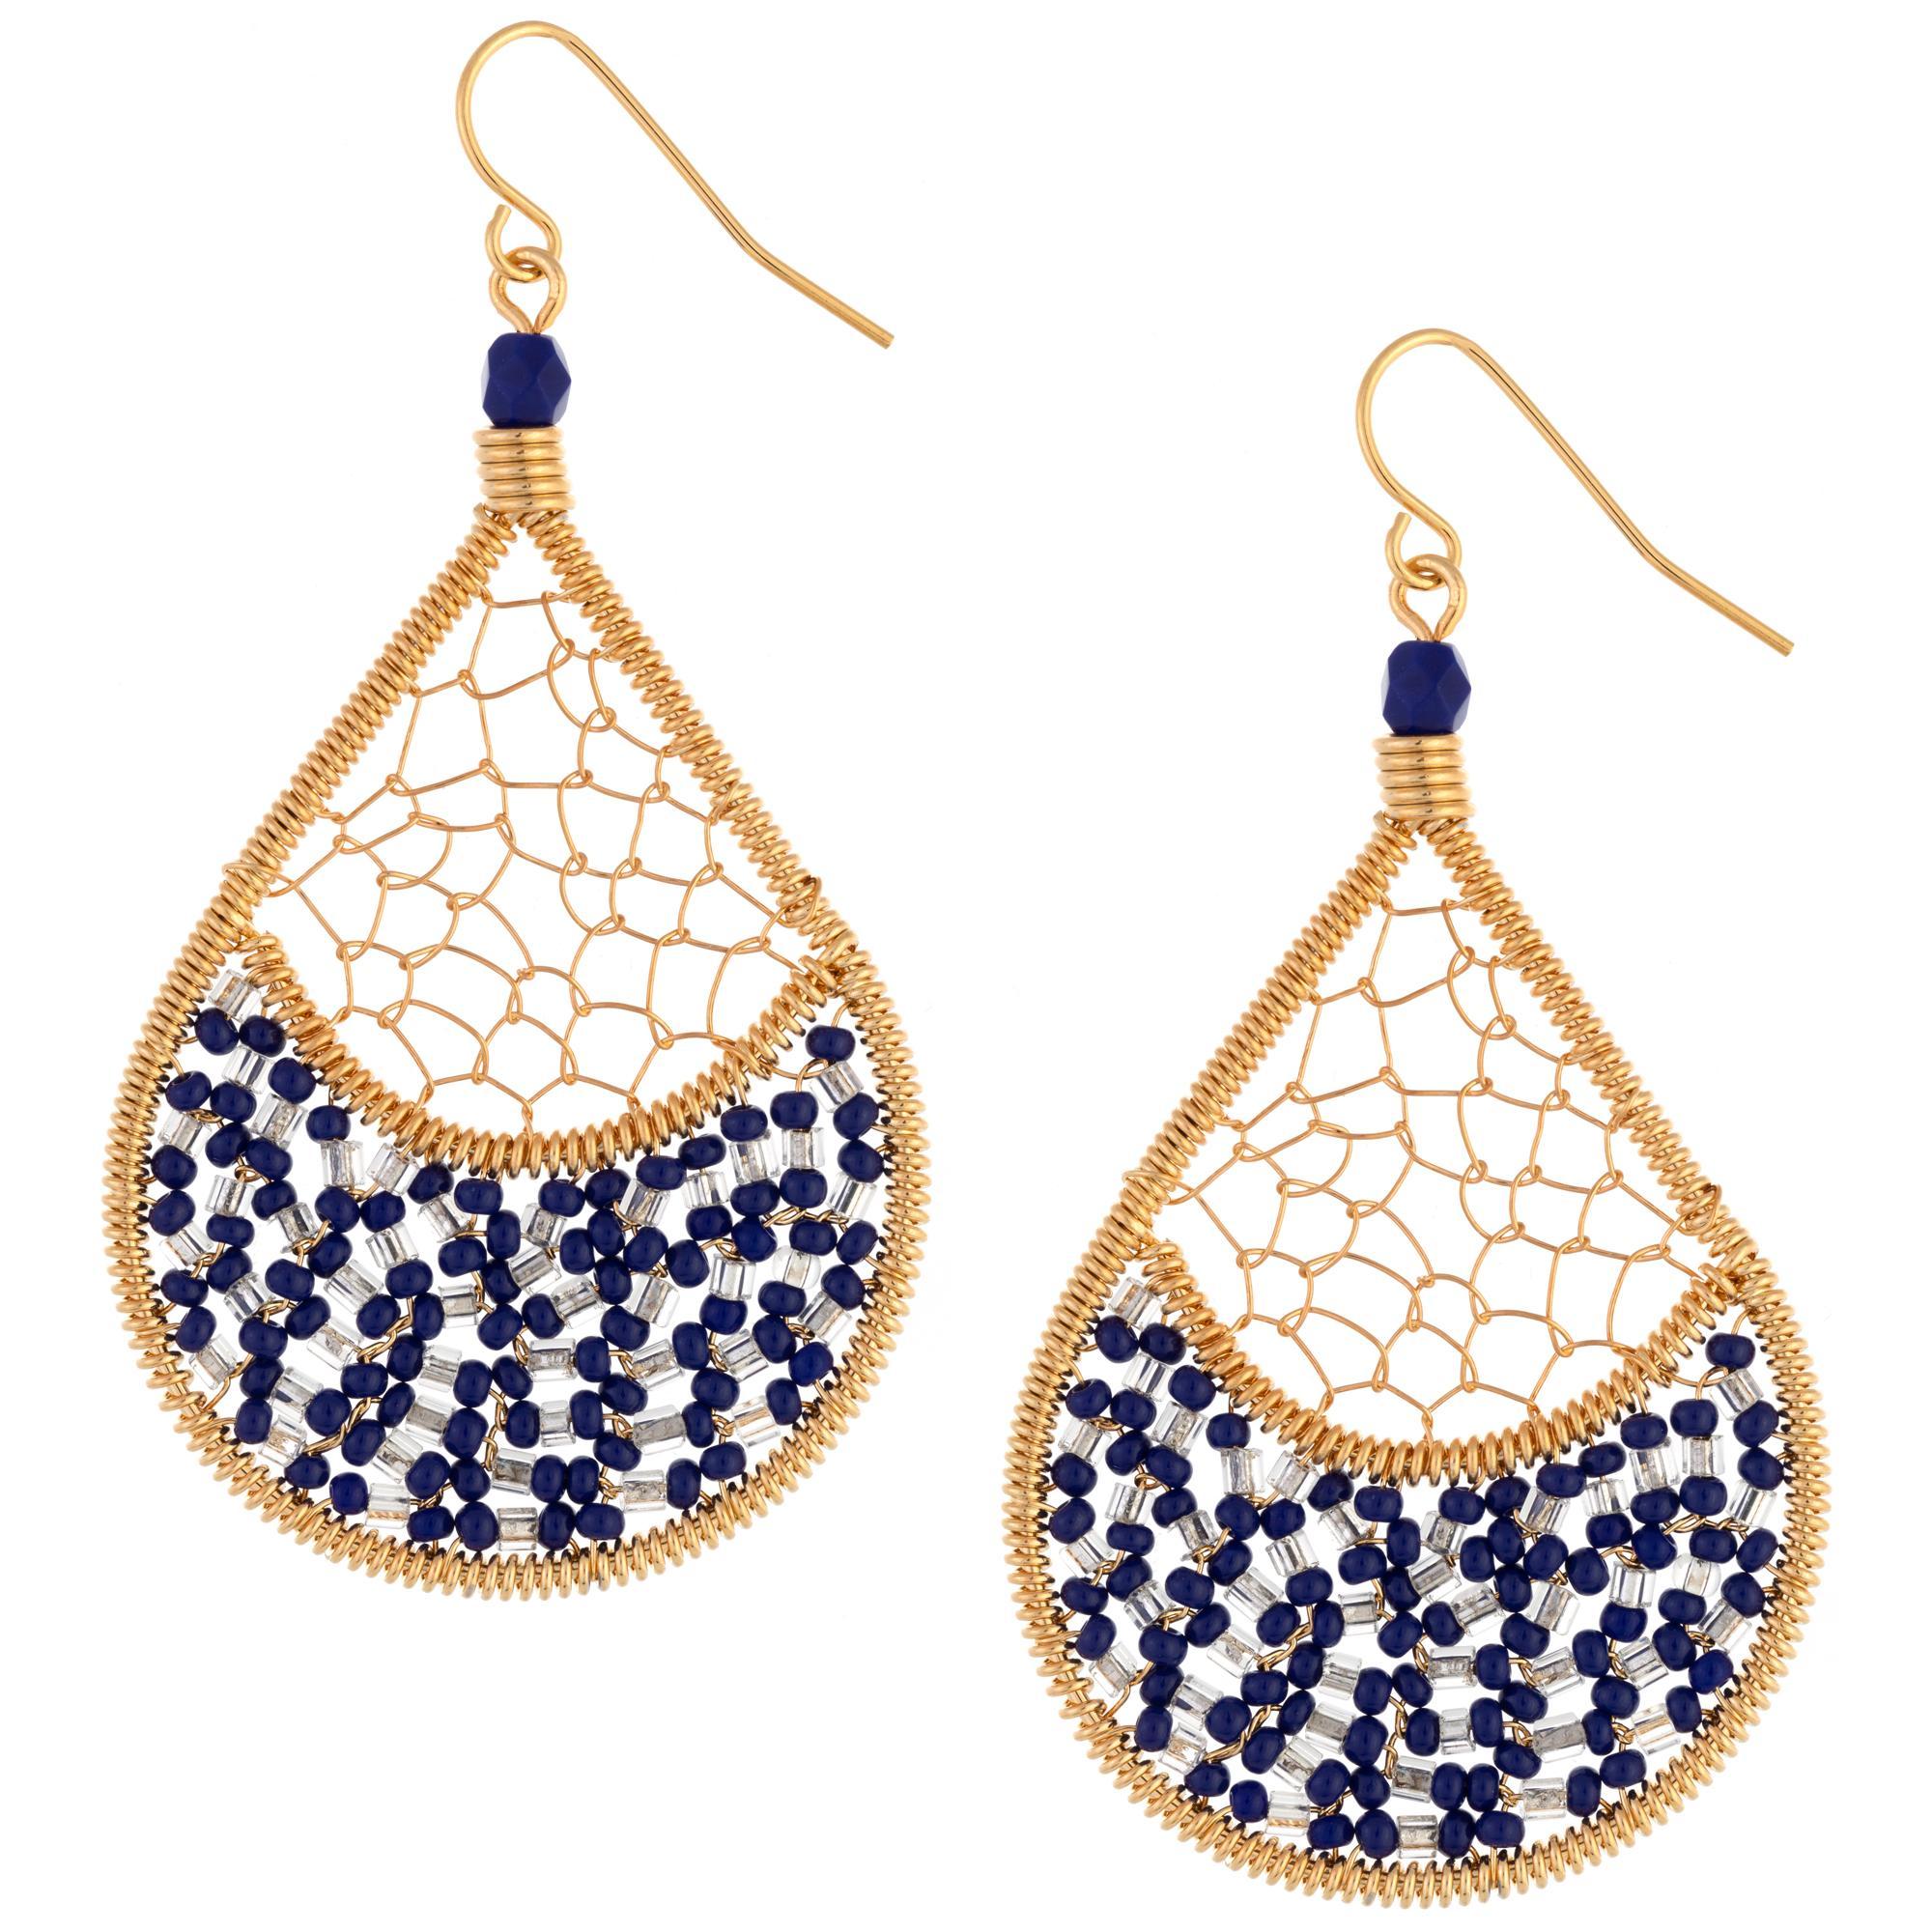 Threads & Beads Gold-Plated Earrings - Blue